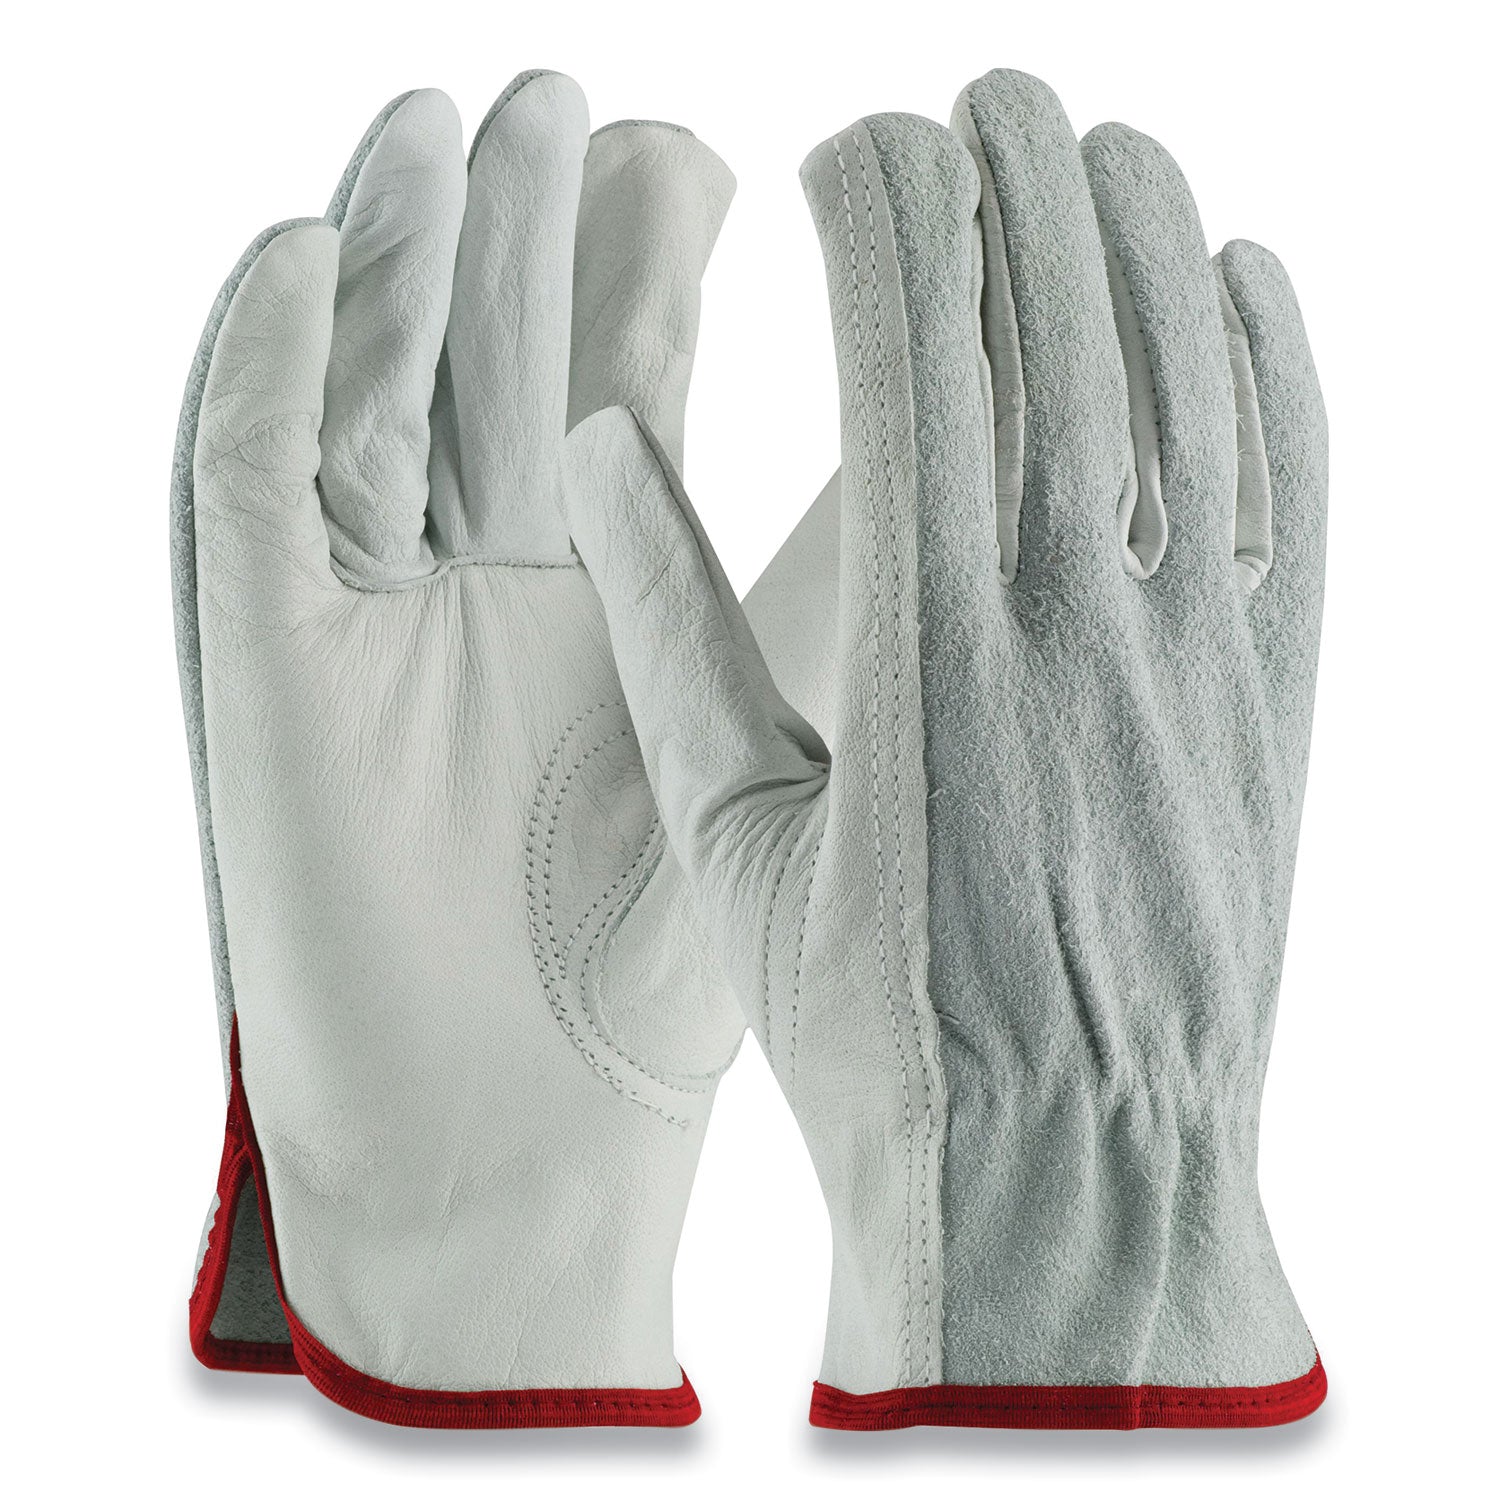 top-grain-leather-drivers-gloves-with-shoulder-split-cowhide-leather-back-small-gray_pid68161sbs - 2